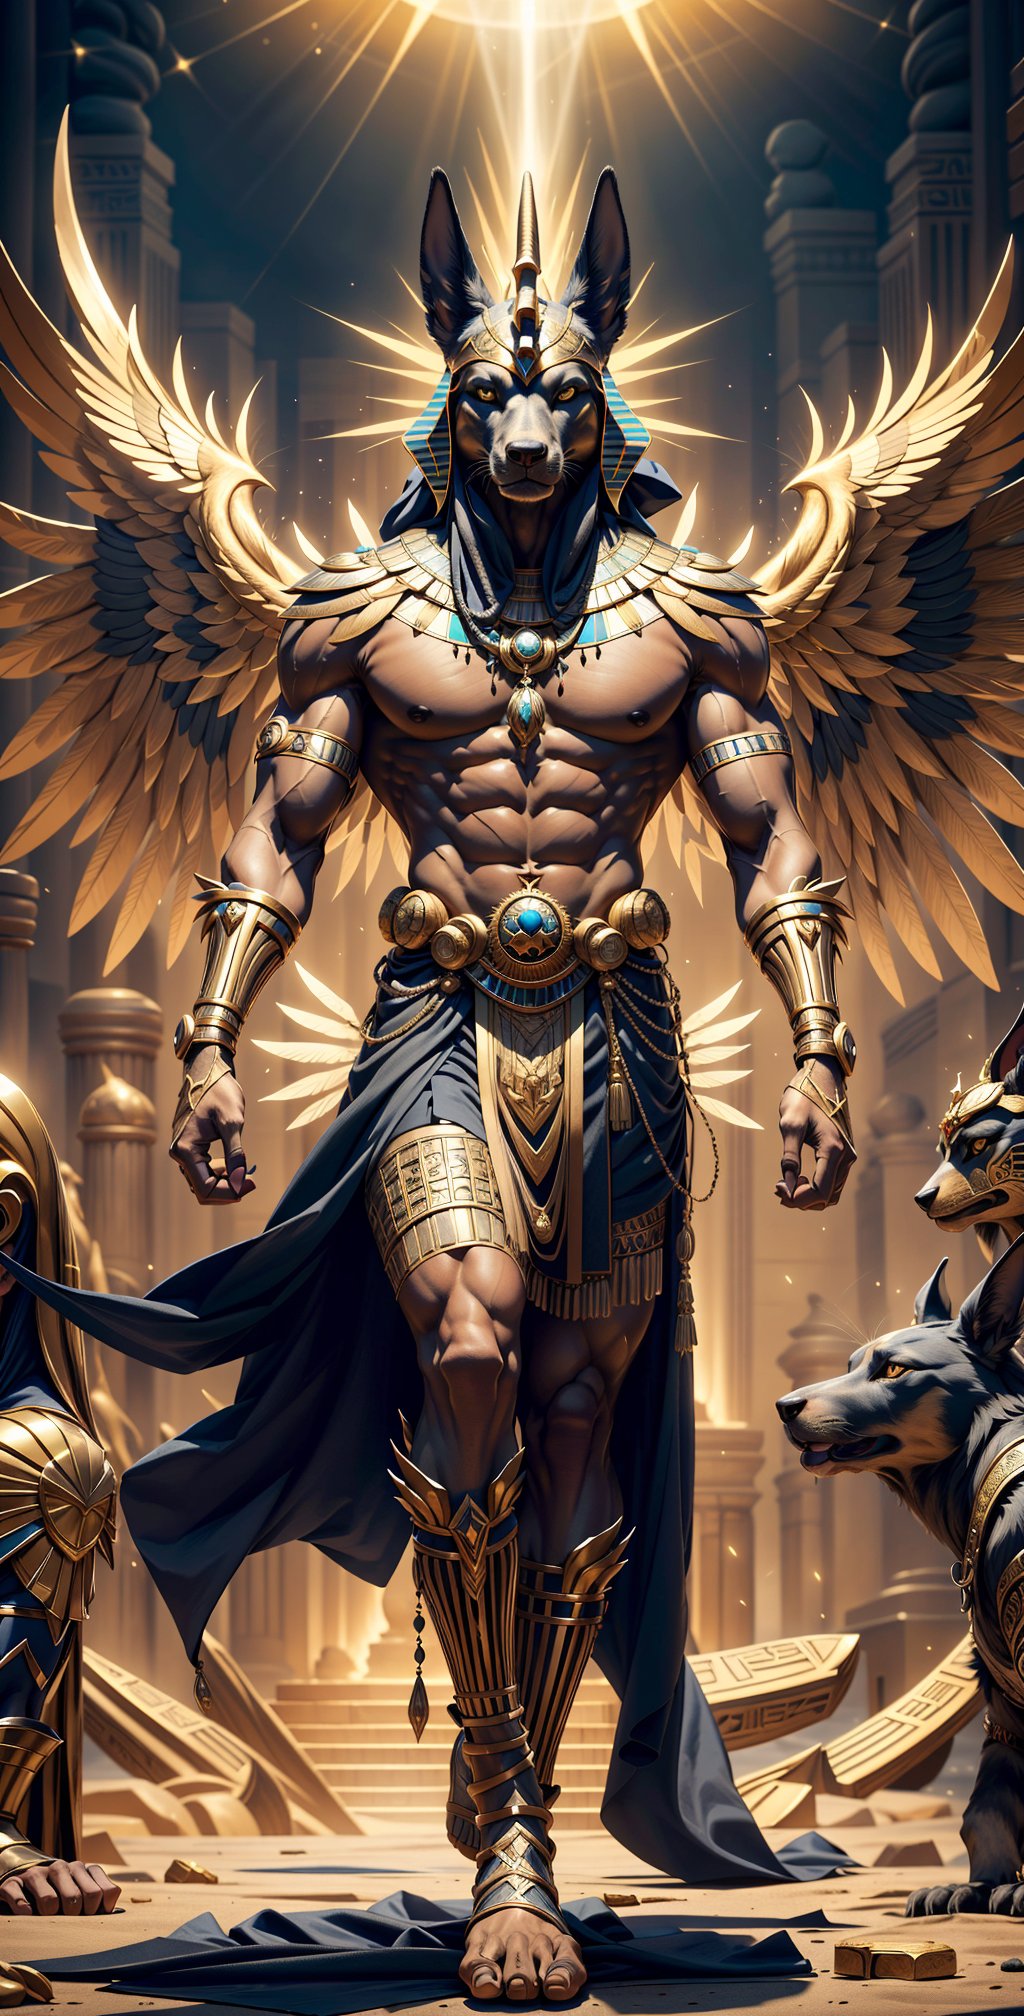 "Visualize the majestic Egyptian god Anubis with a muscular physique, his body radiating power. He stands tall with golden wings unfurled, exuding an aura of divine authority and protection.",Cyber_Egypt